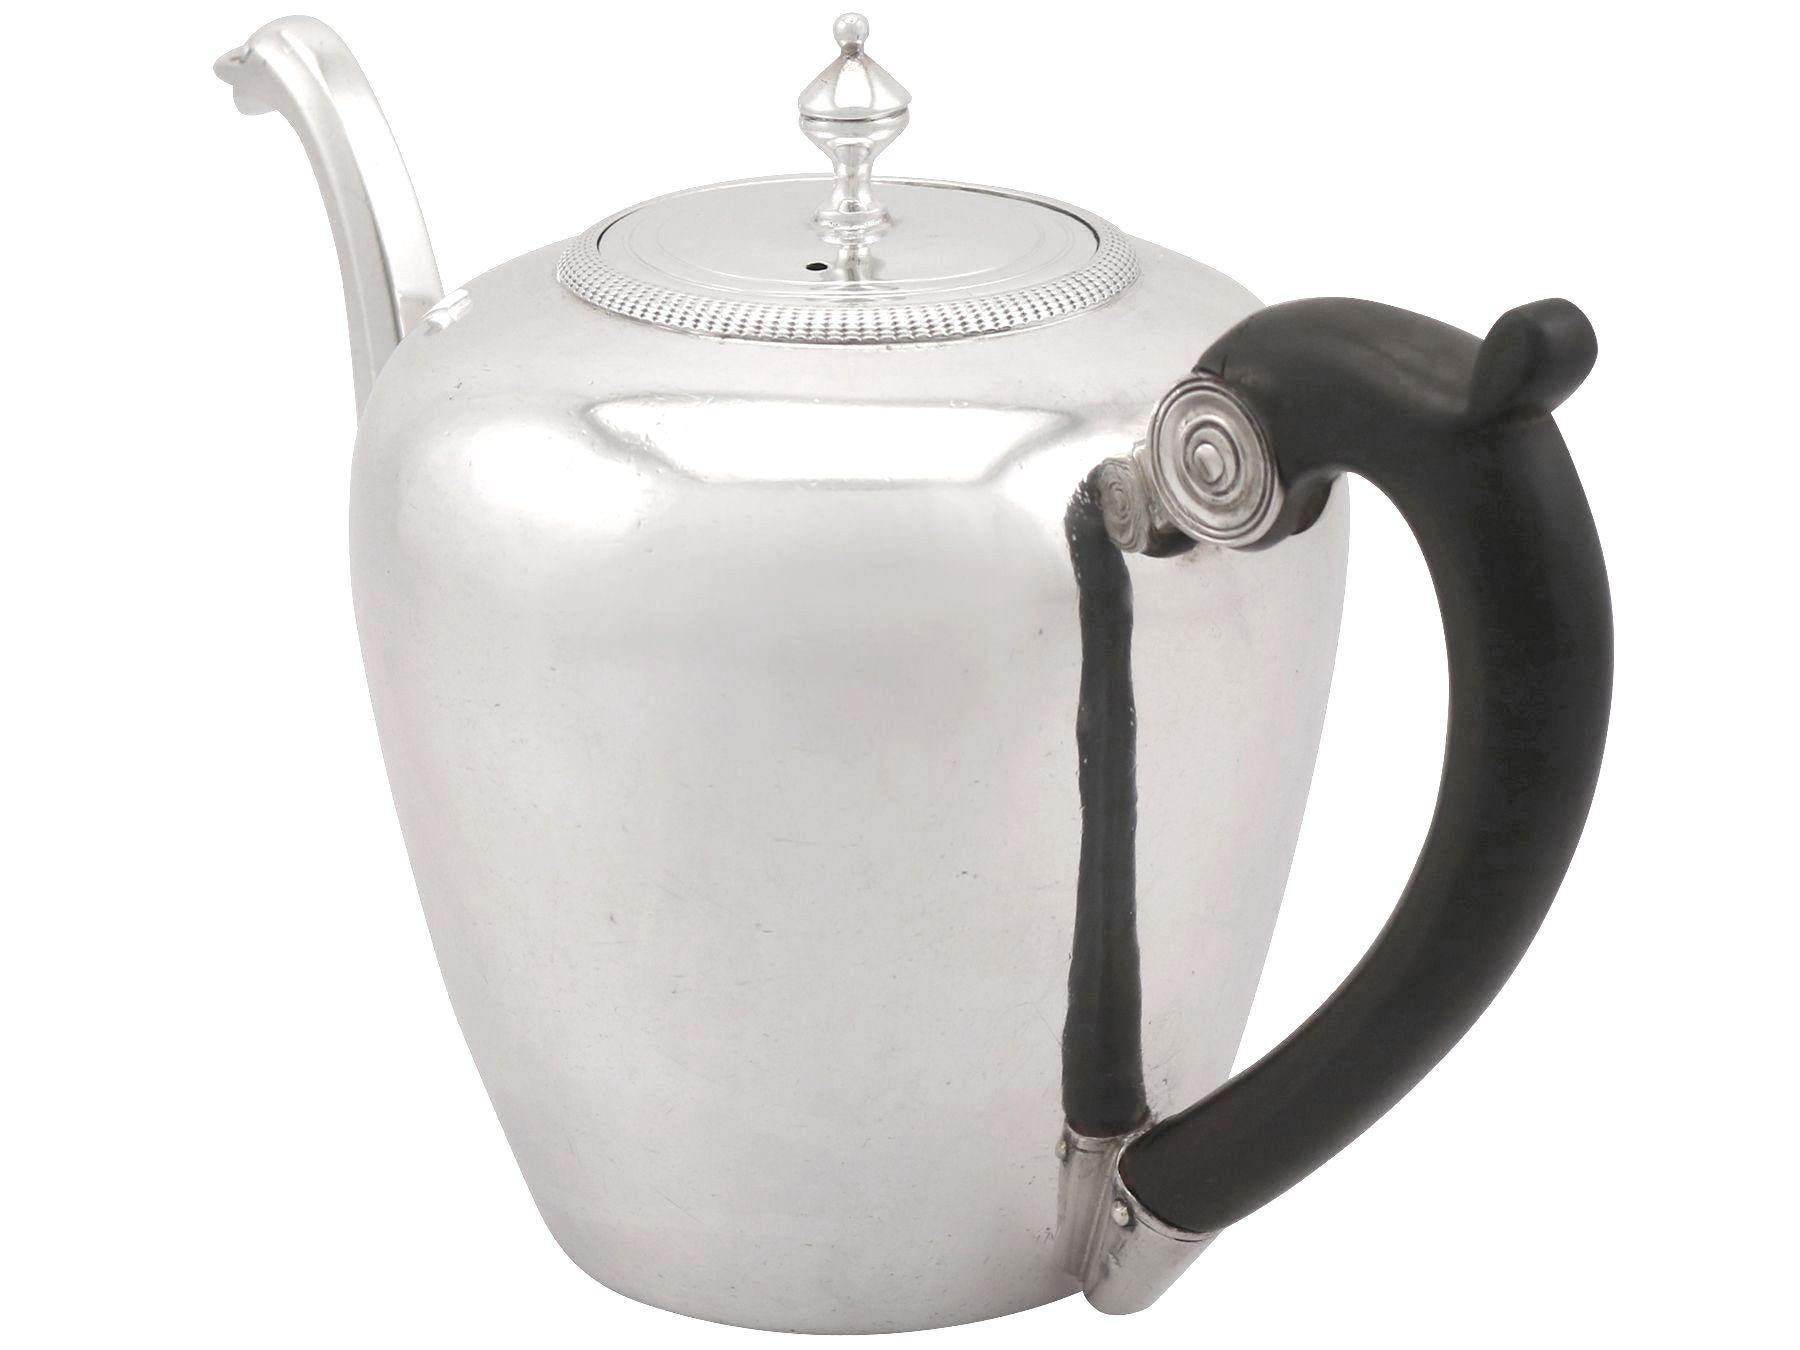 Late 18th Century Antique French Silver Teapot, Circa 1789